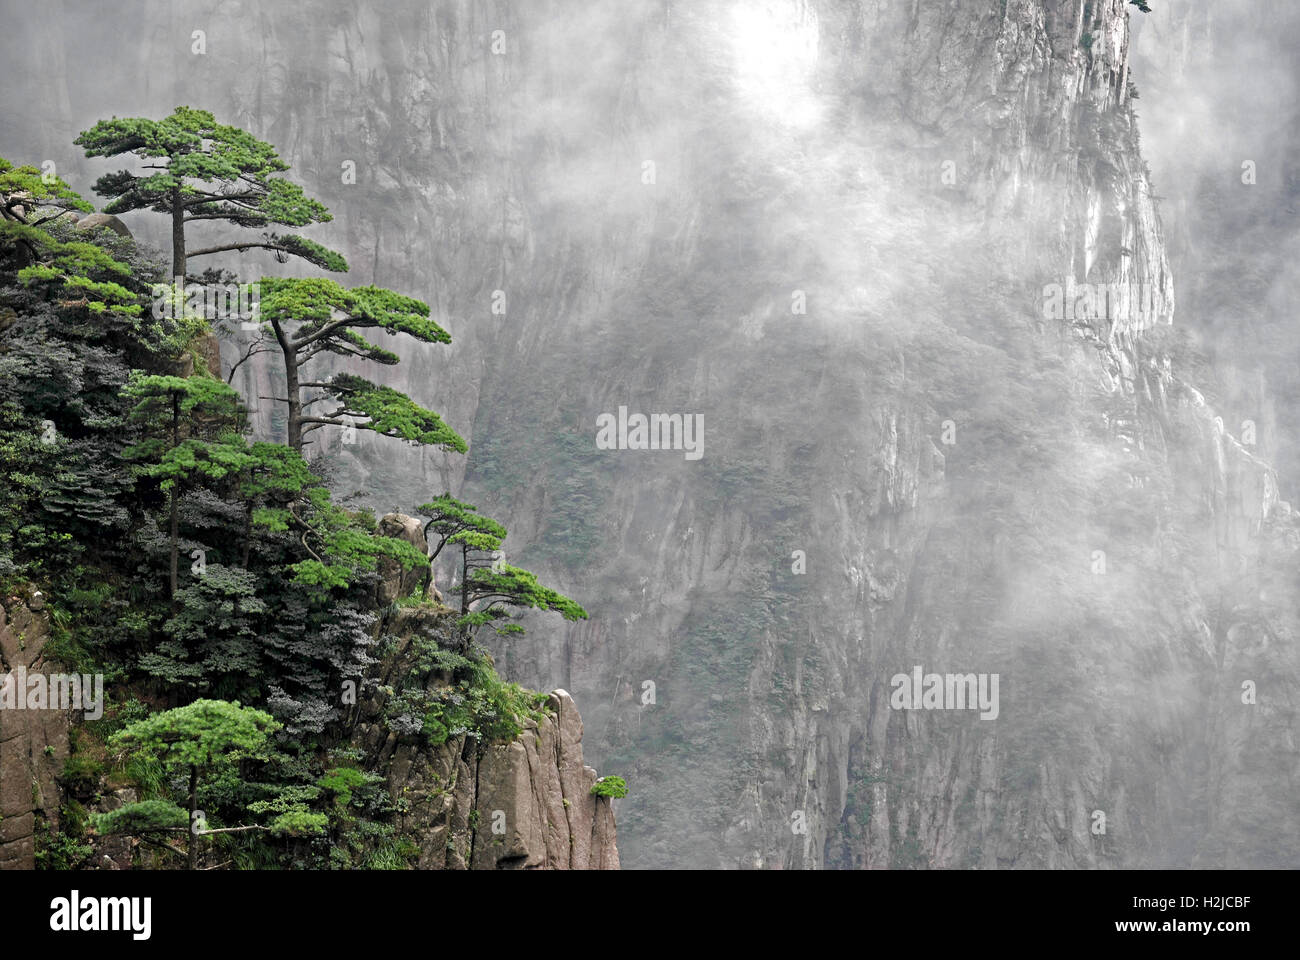 Huangshan pine trees hang over the crags at Huangshan National Park in Anhui, China. Stock Photo